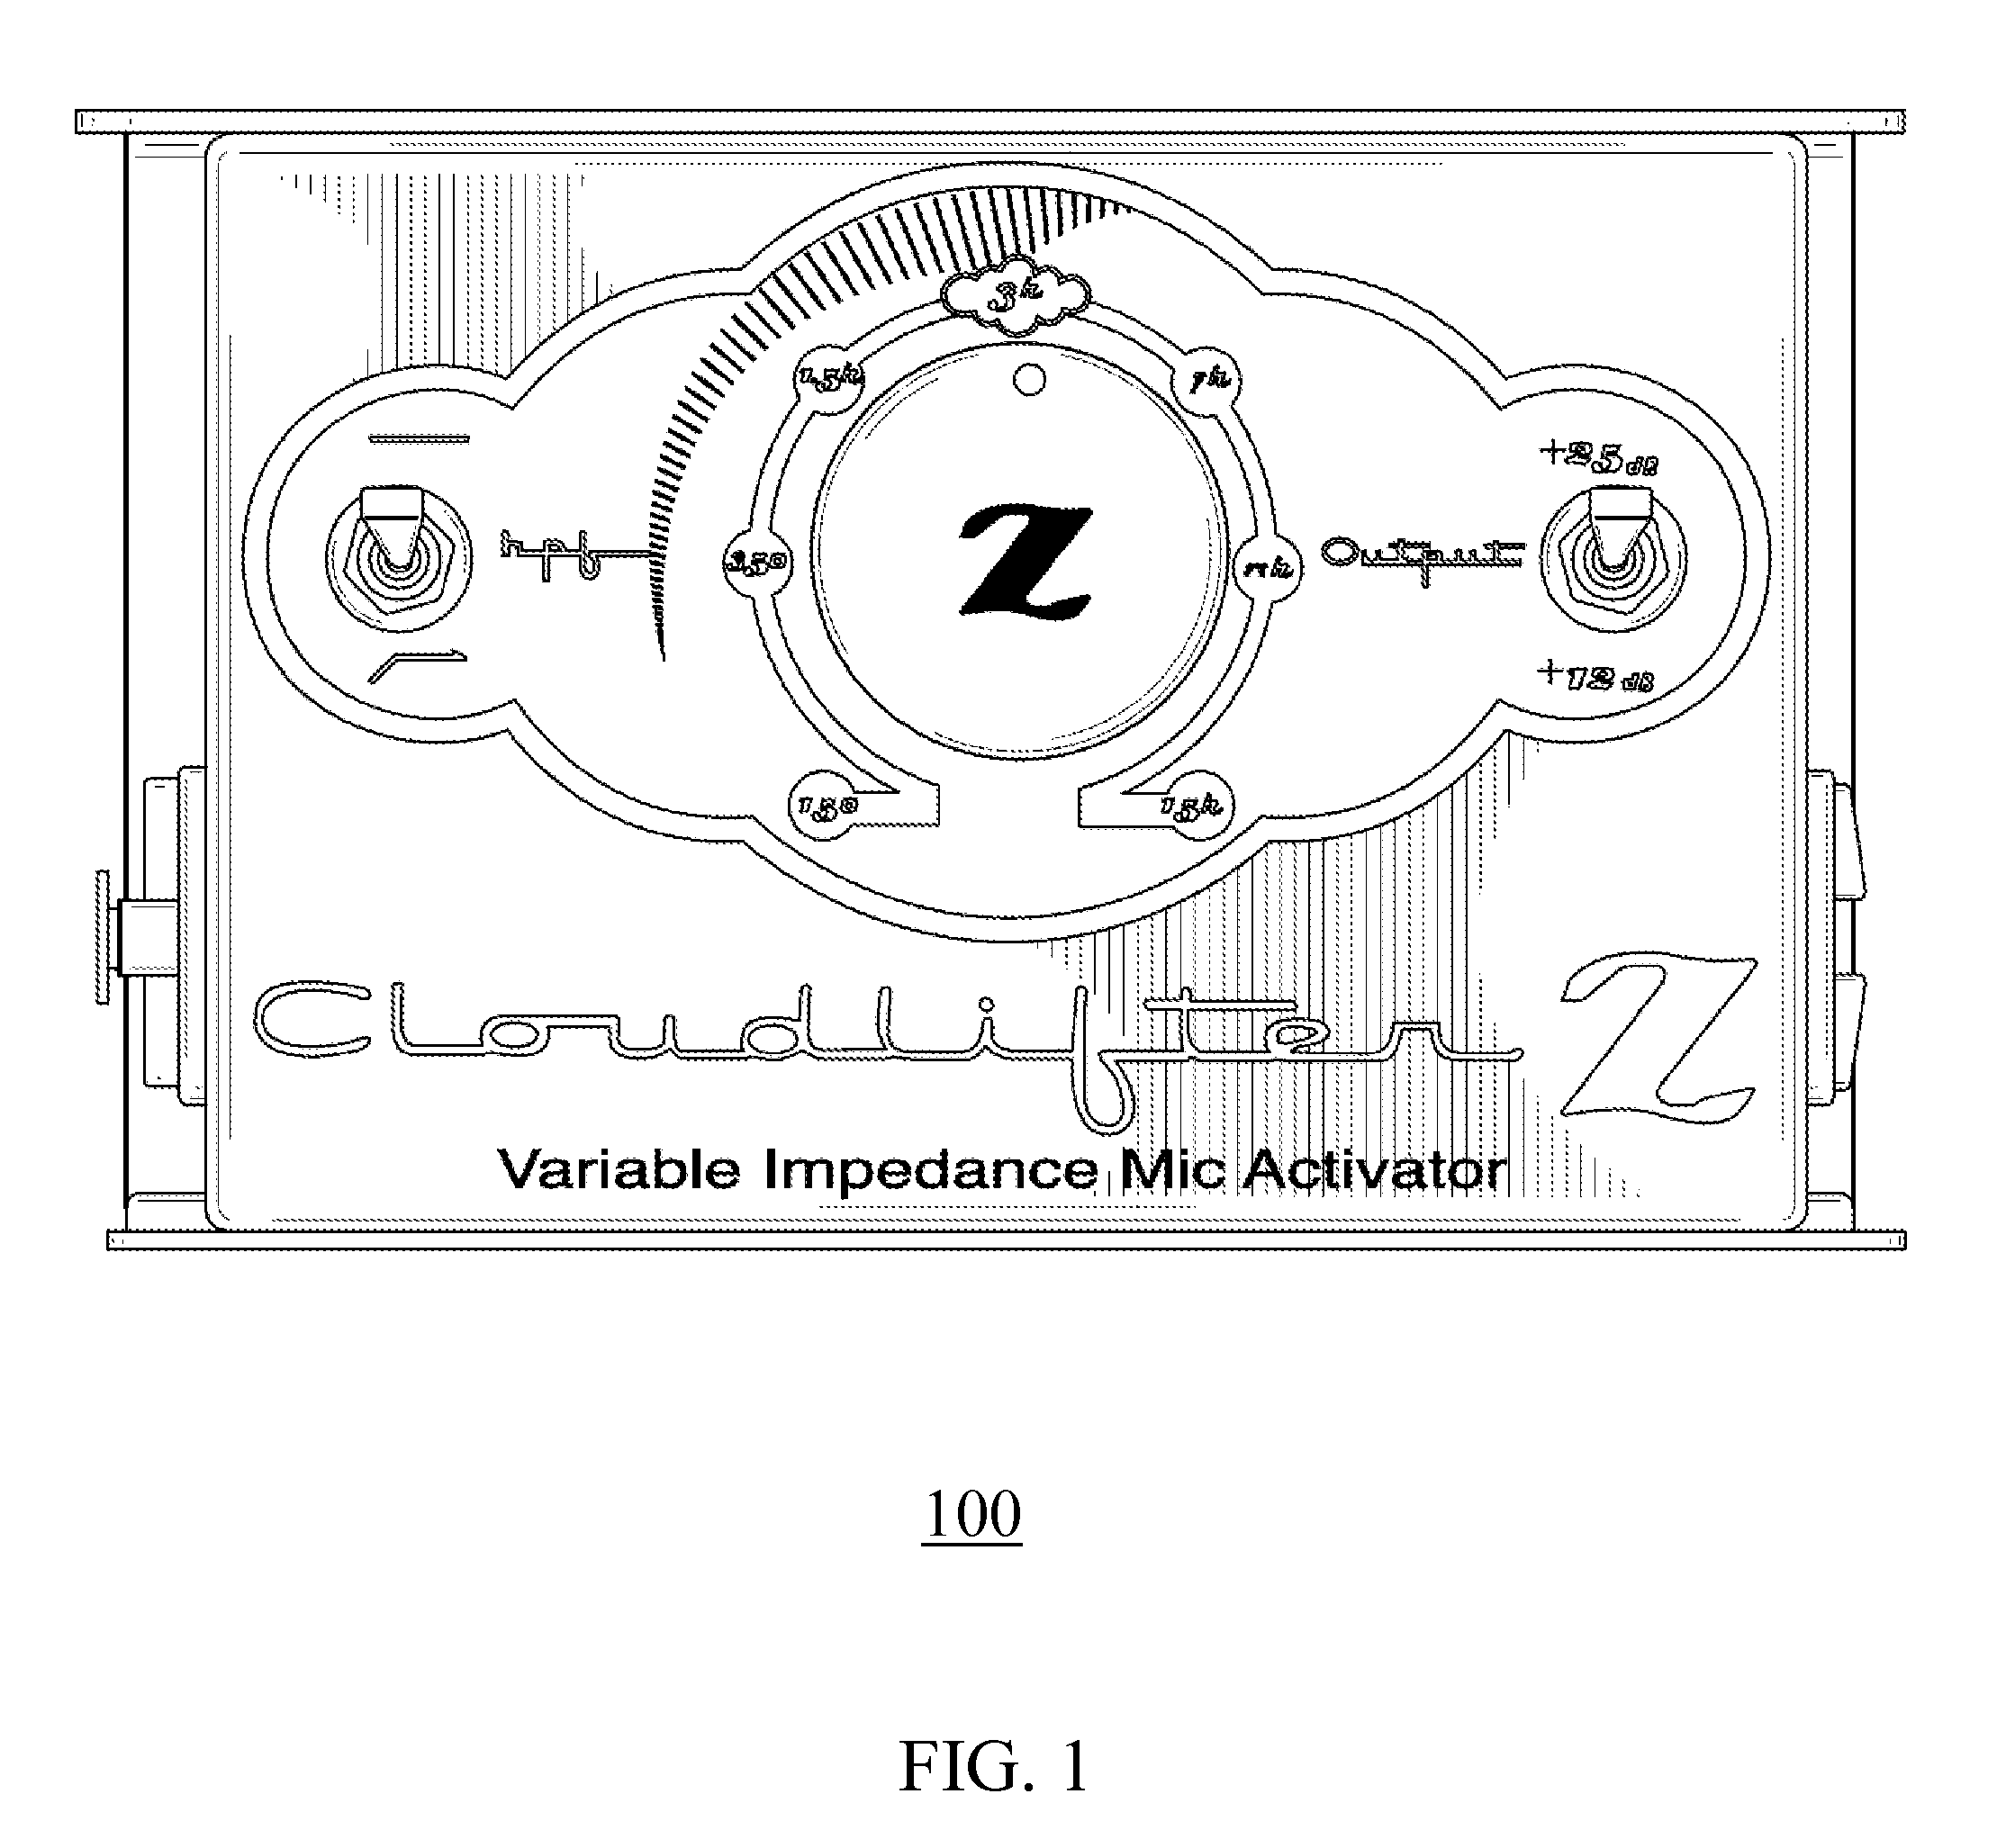 Phantom-powered inline preamplifier with variable impedance loading and adjustable interface